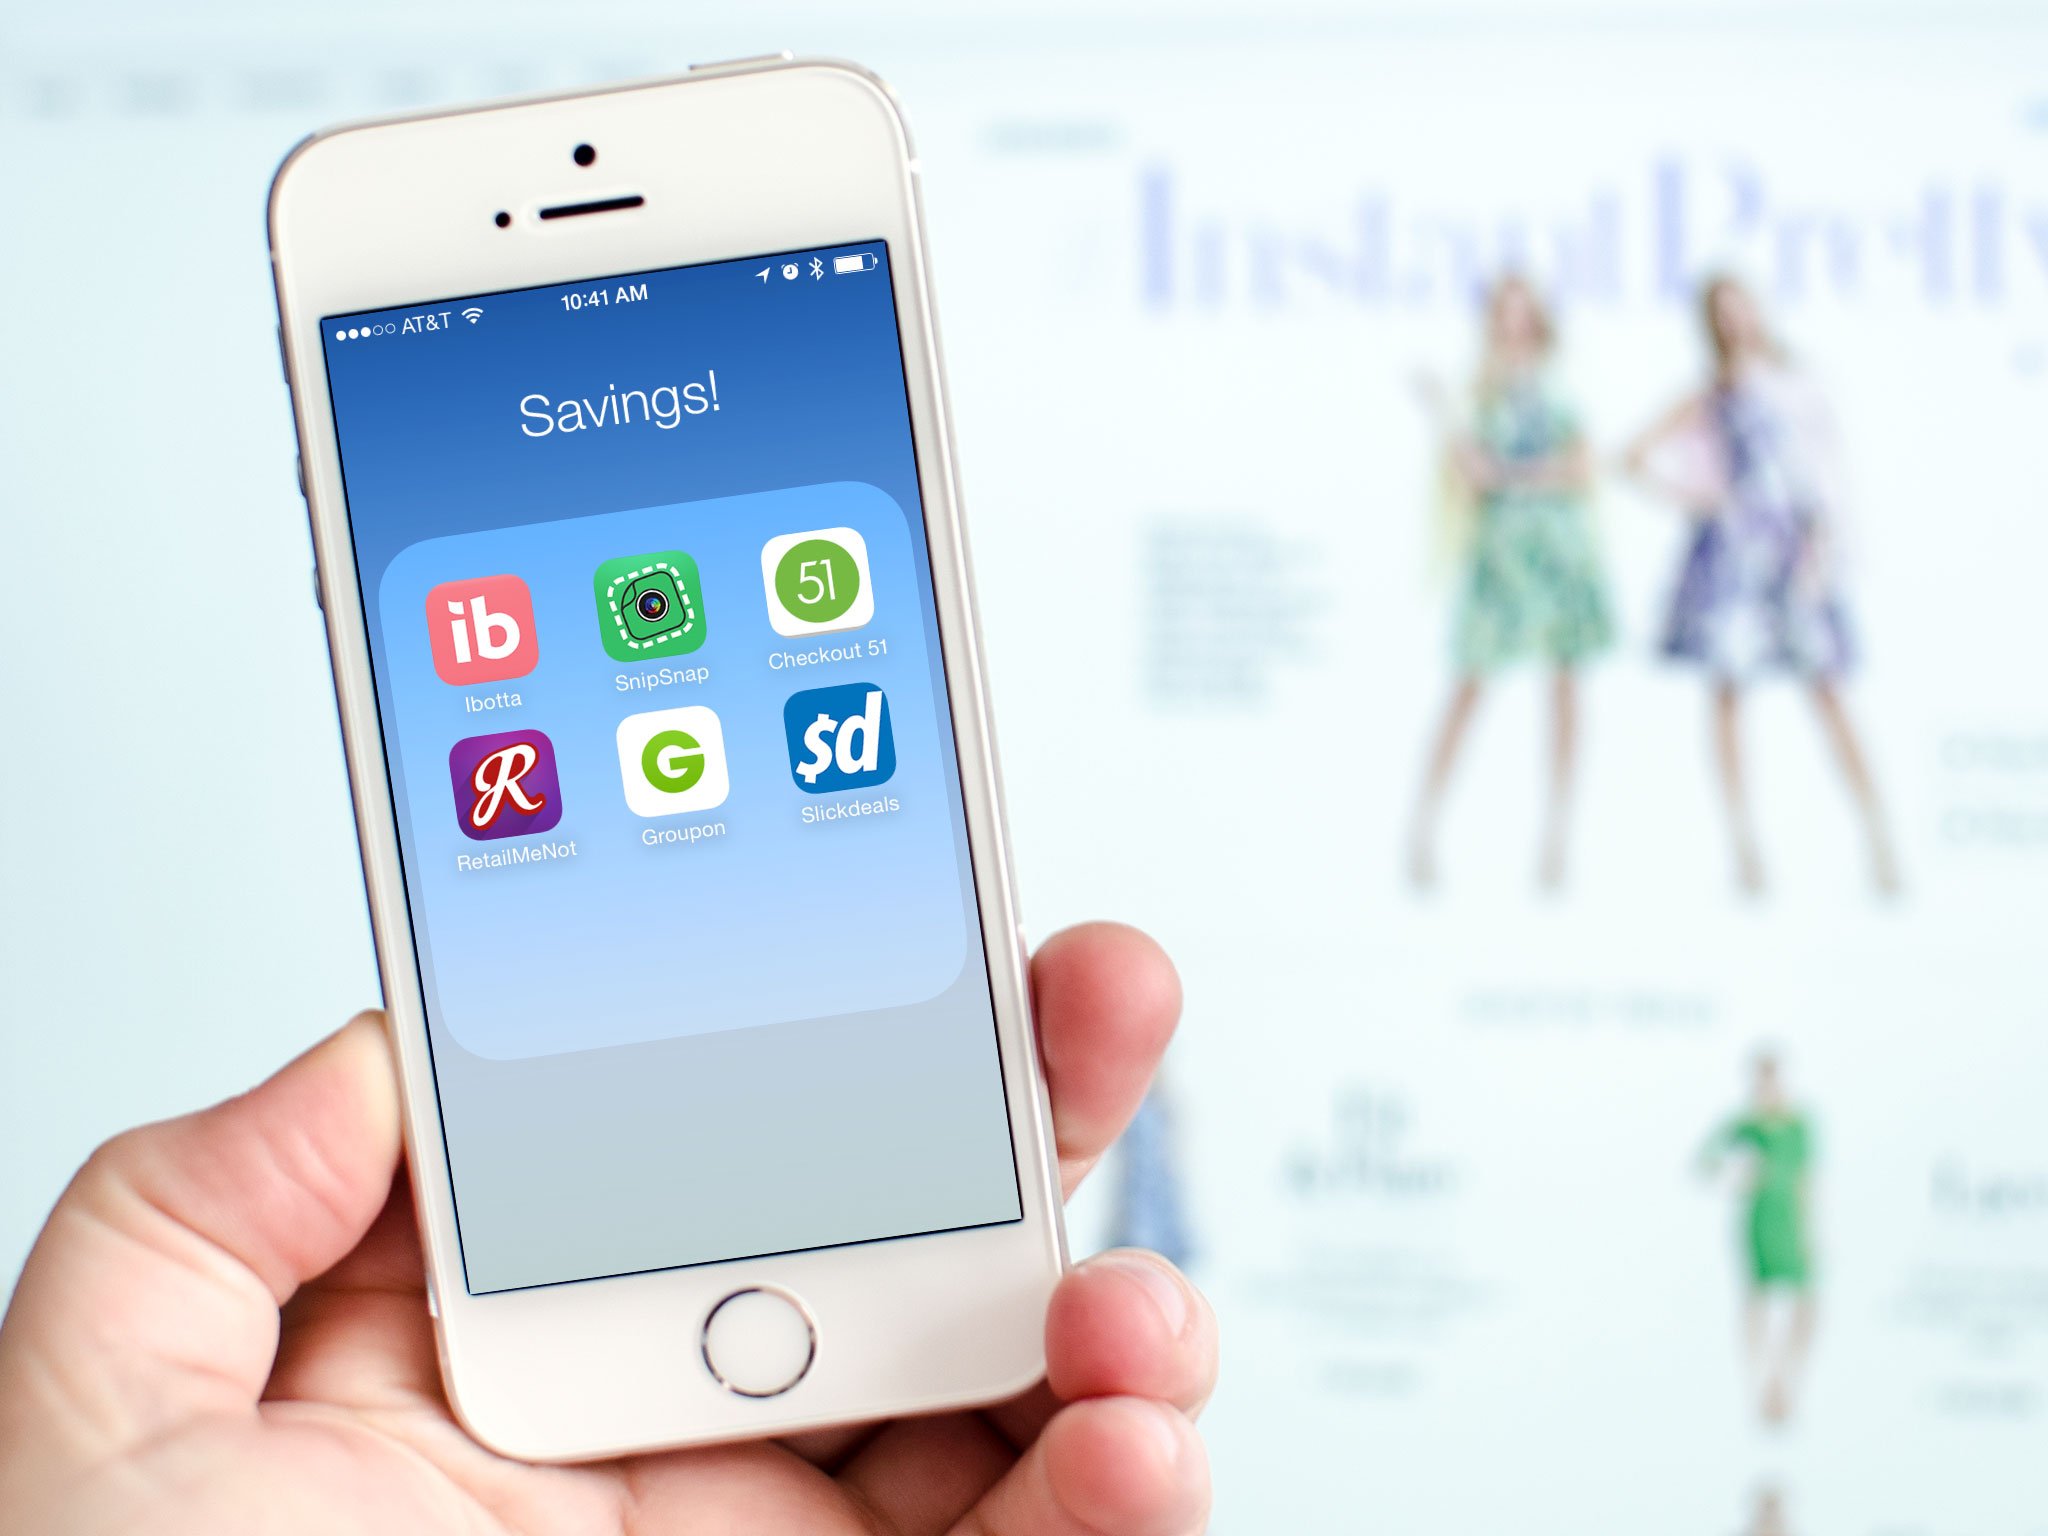 Best coupon and savings apps for iPhone: Ibotta, SnipSnap, Checkout 51, and more!